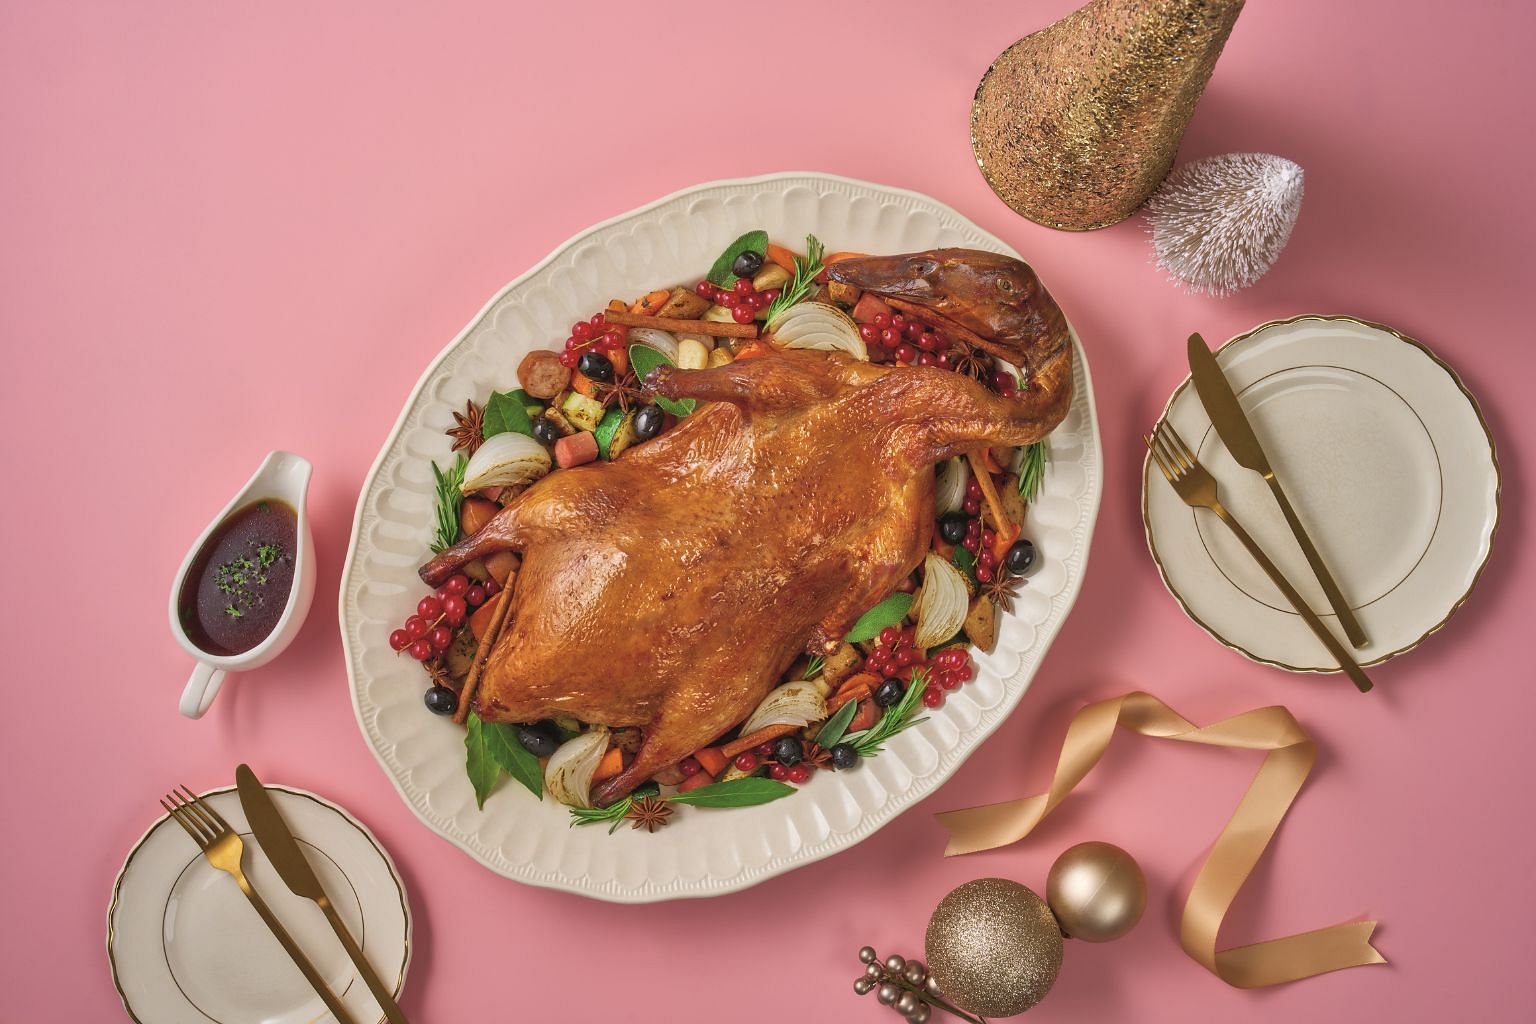 from roast duck sets to halal platters and gifting ideas: get all your christmas needs at this one-stop wonderland